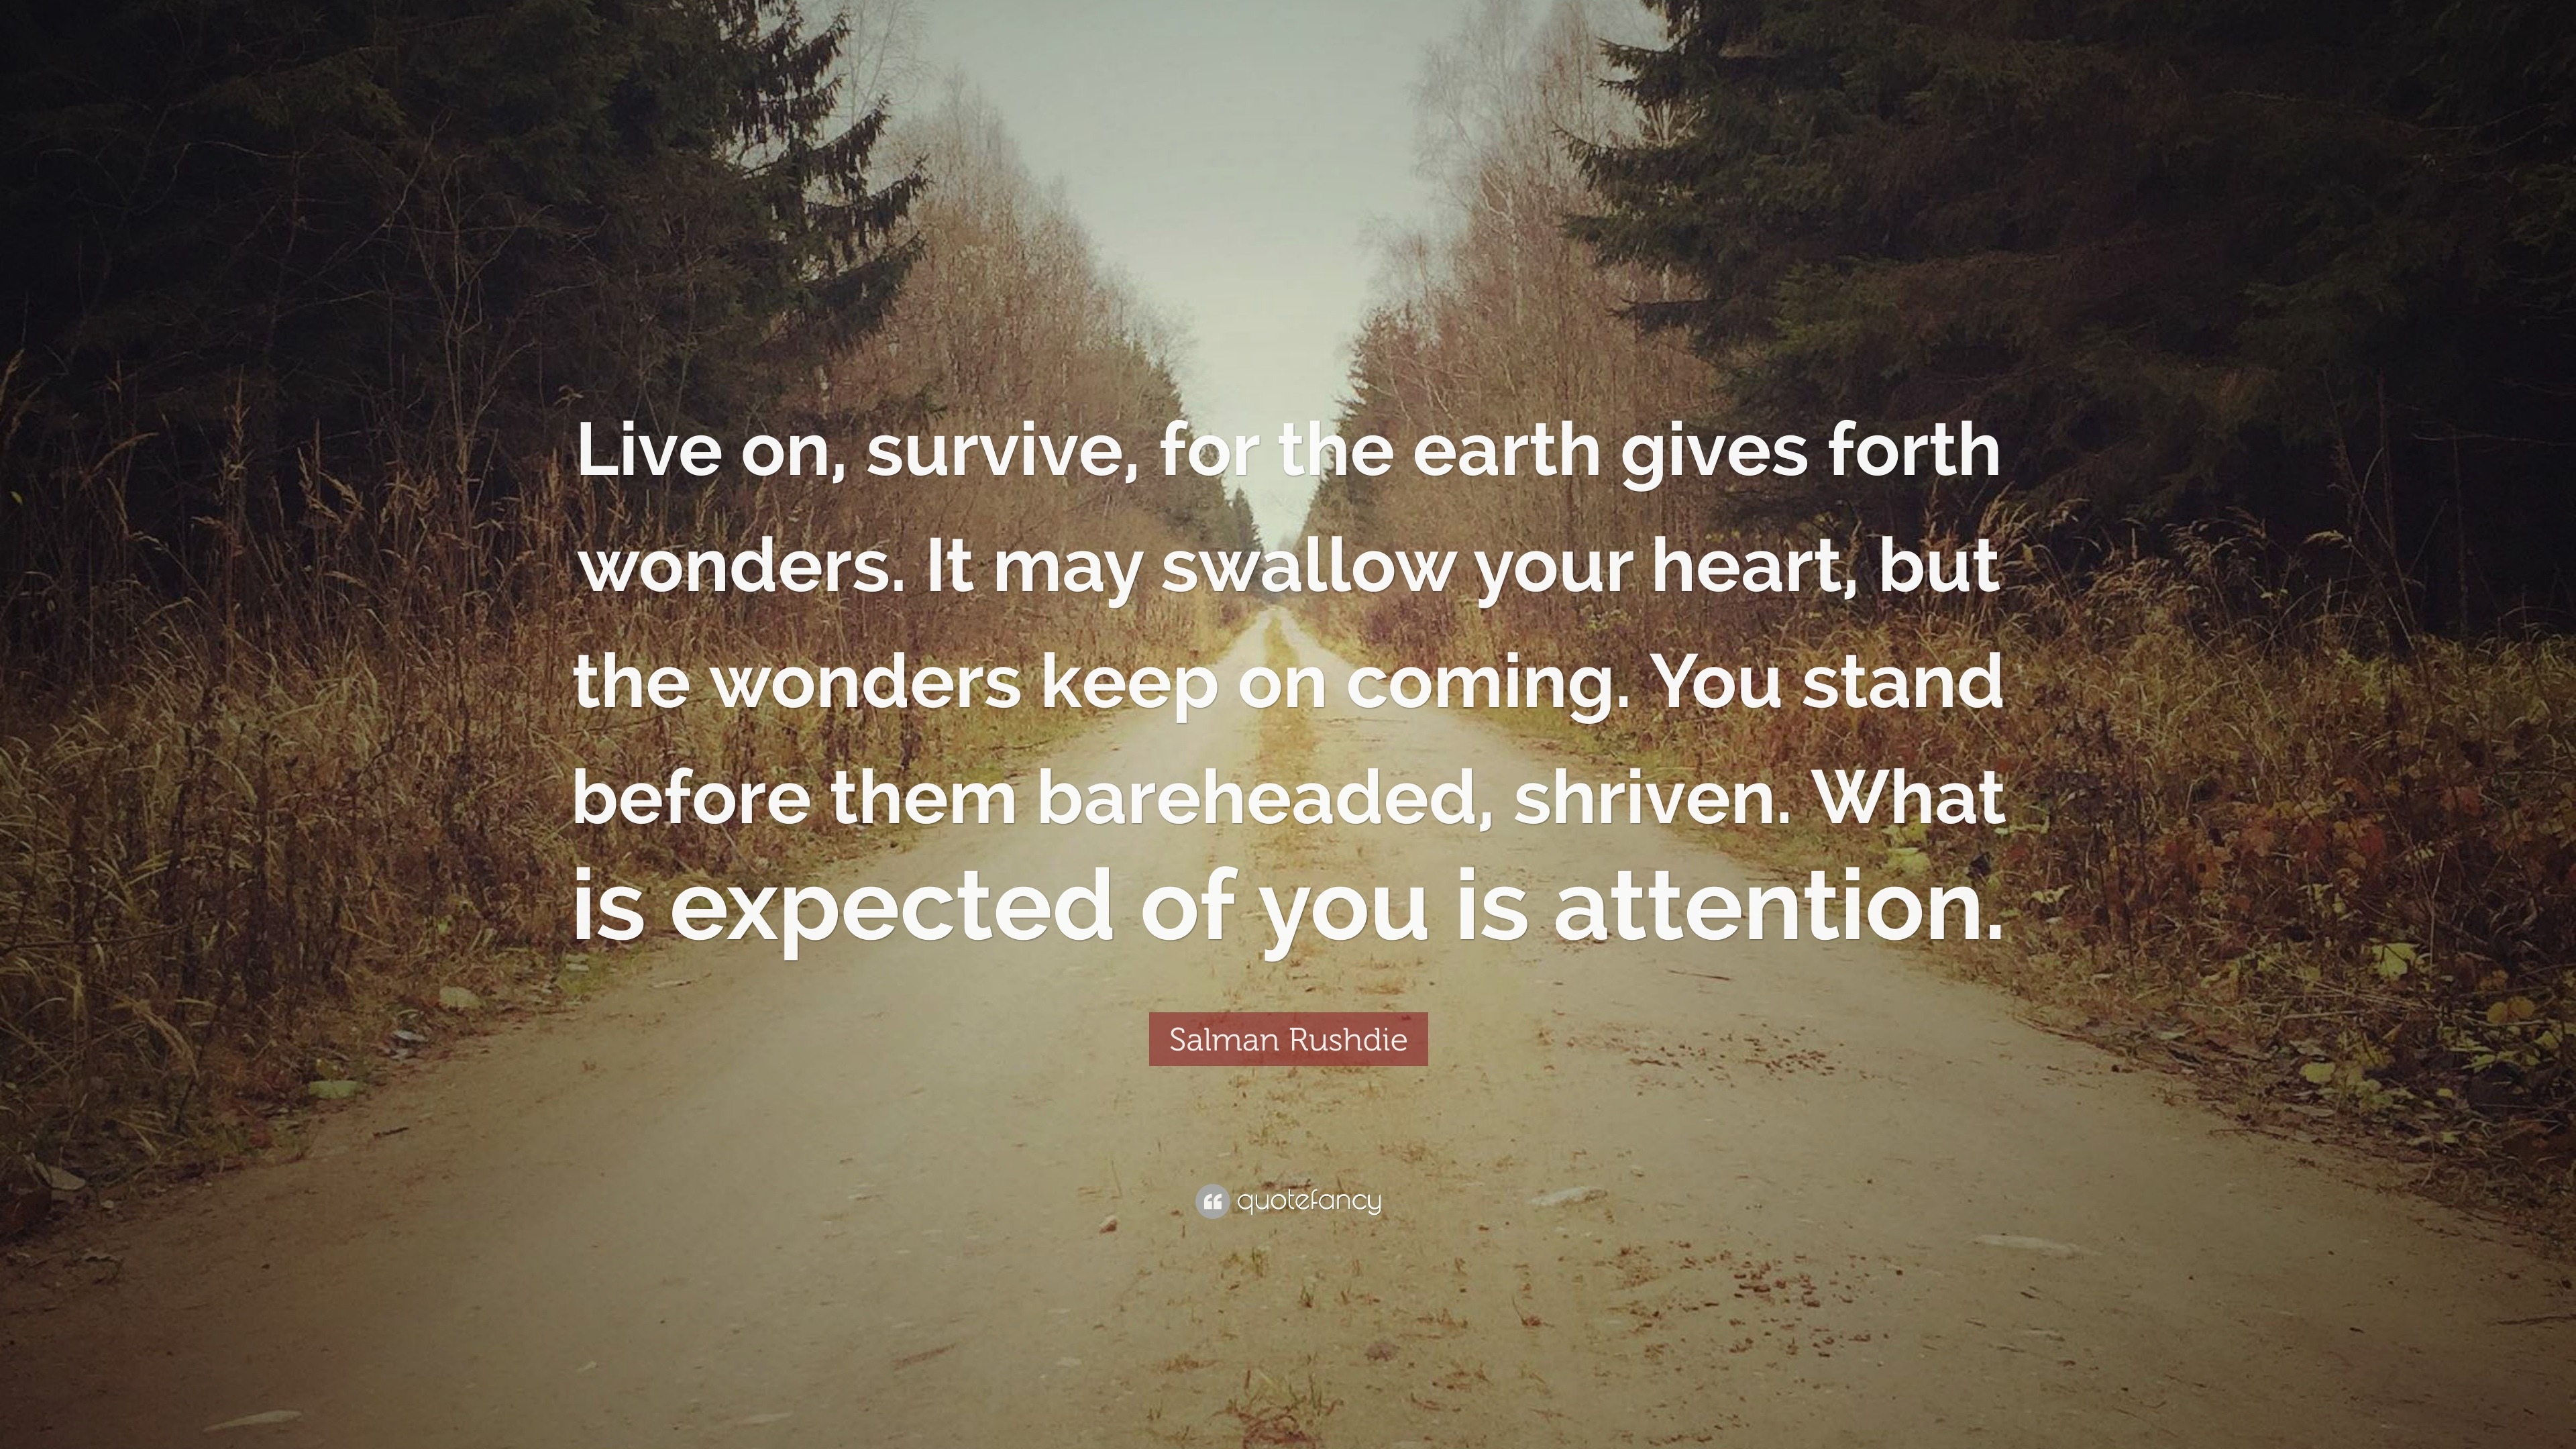 Salman Rushdie Quote: “Live on, survive, for the earth gives forth wonders.  It may swallow your heart, but the wonders keep on coming. You stan...”